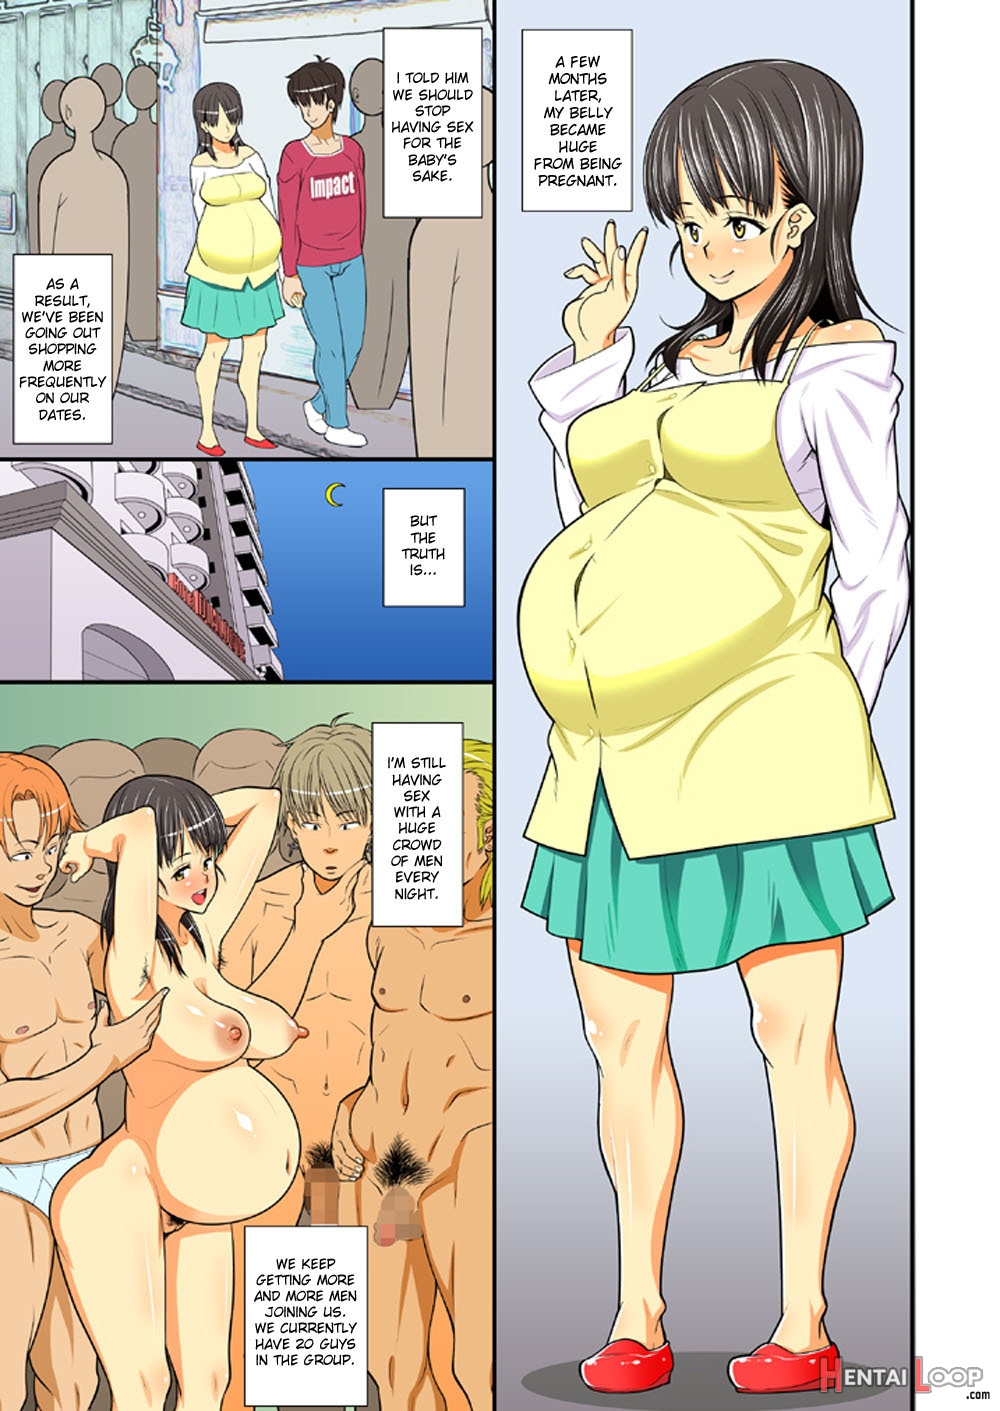 Pregnant All The Time! Her Hidden Circumstances page 26